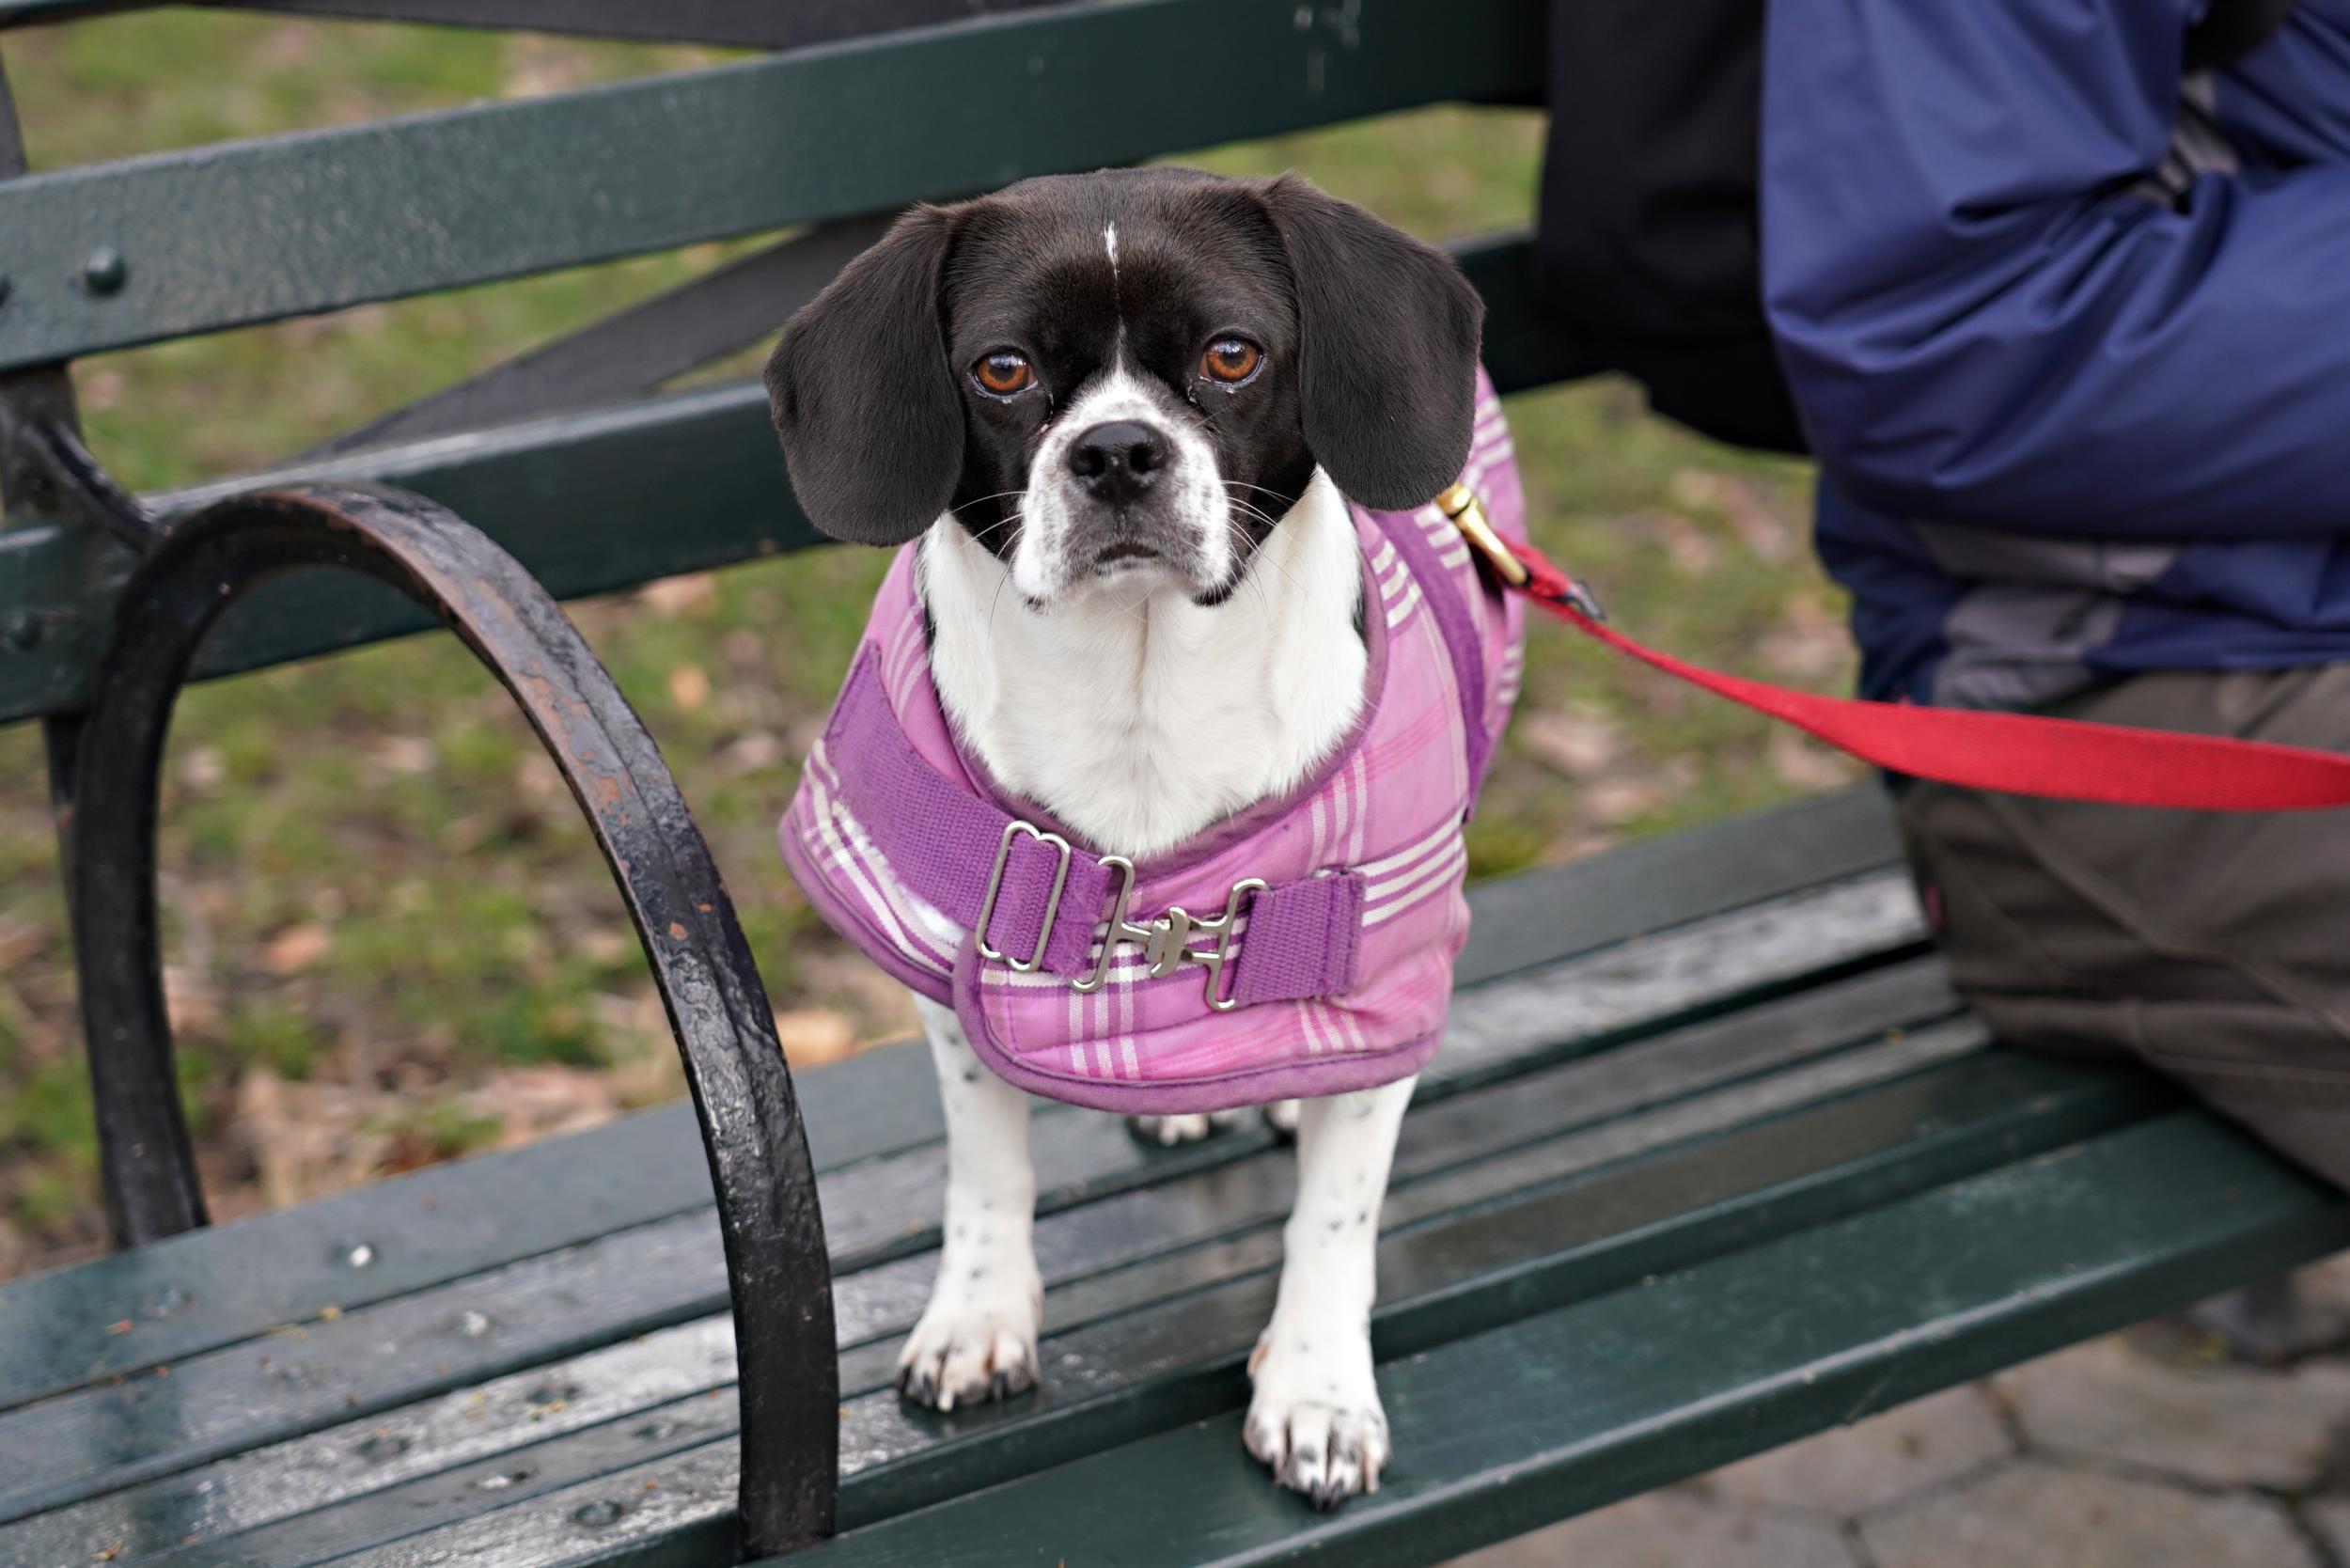 A Beagle/ Pekingese dog stands on a bench in Central Park on March 17, 2020 in New York City. (There is no suggestion that this dog will be euthanized).